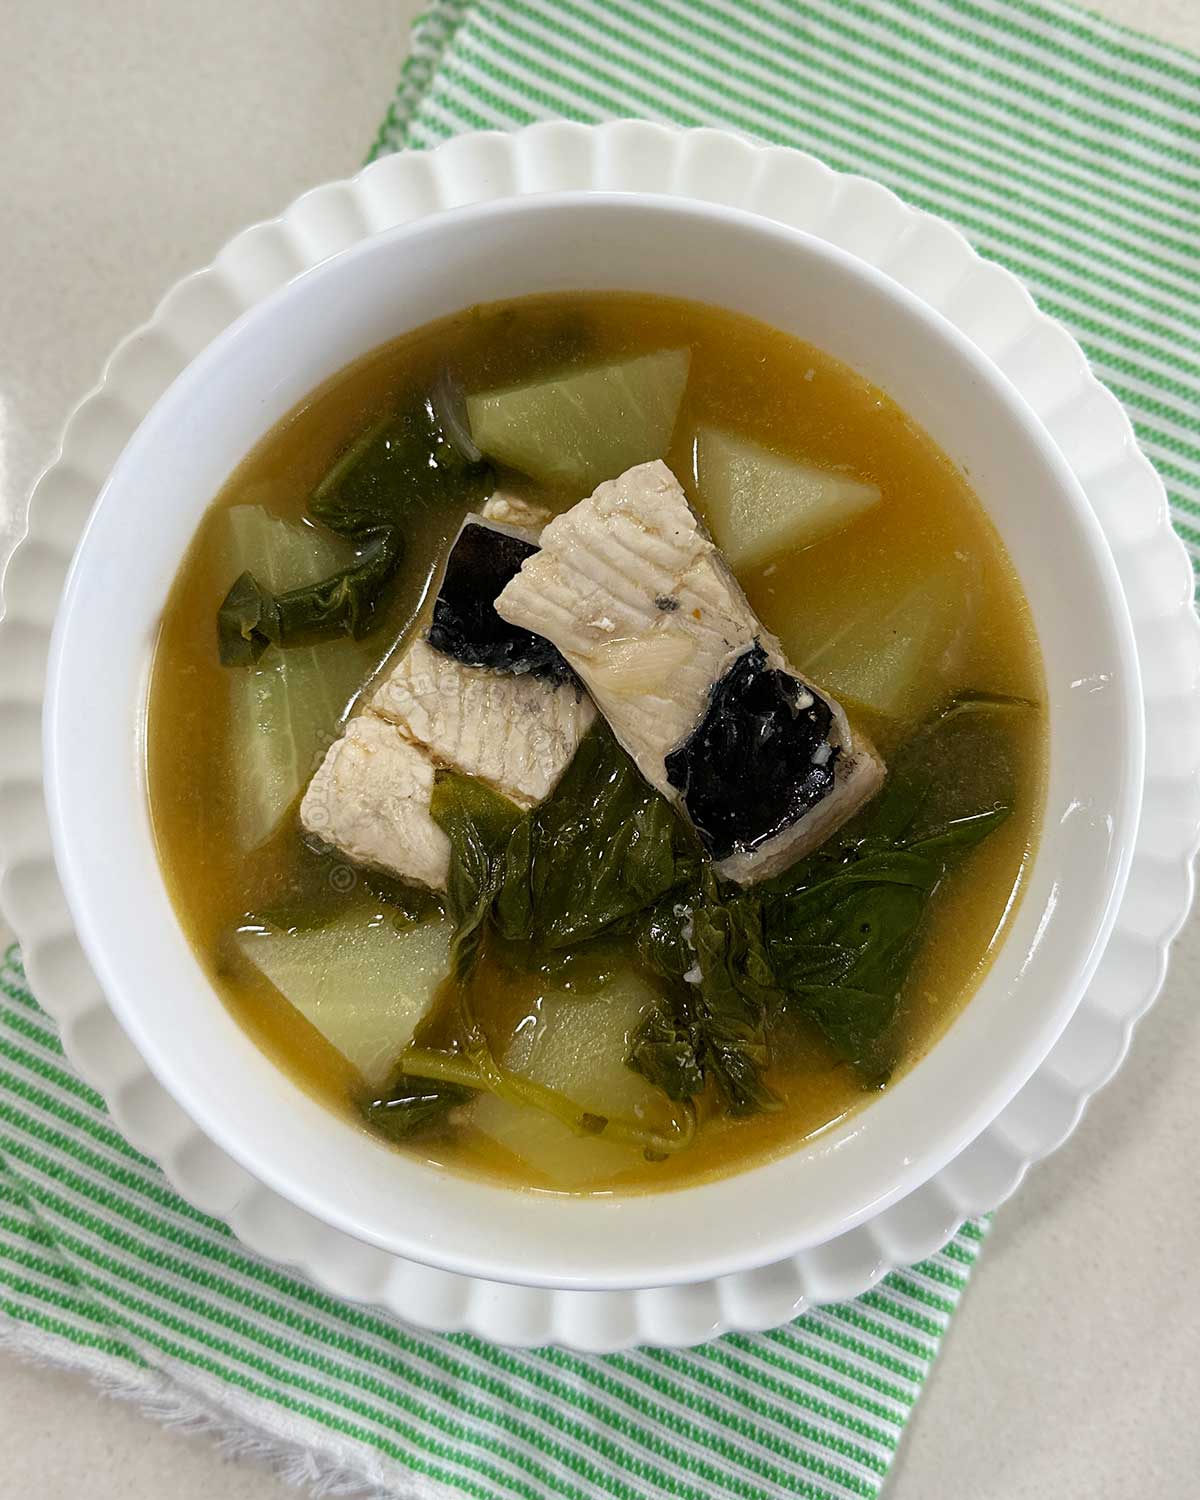 Gingered fish belly and vegetable soup (tinolang bangus)